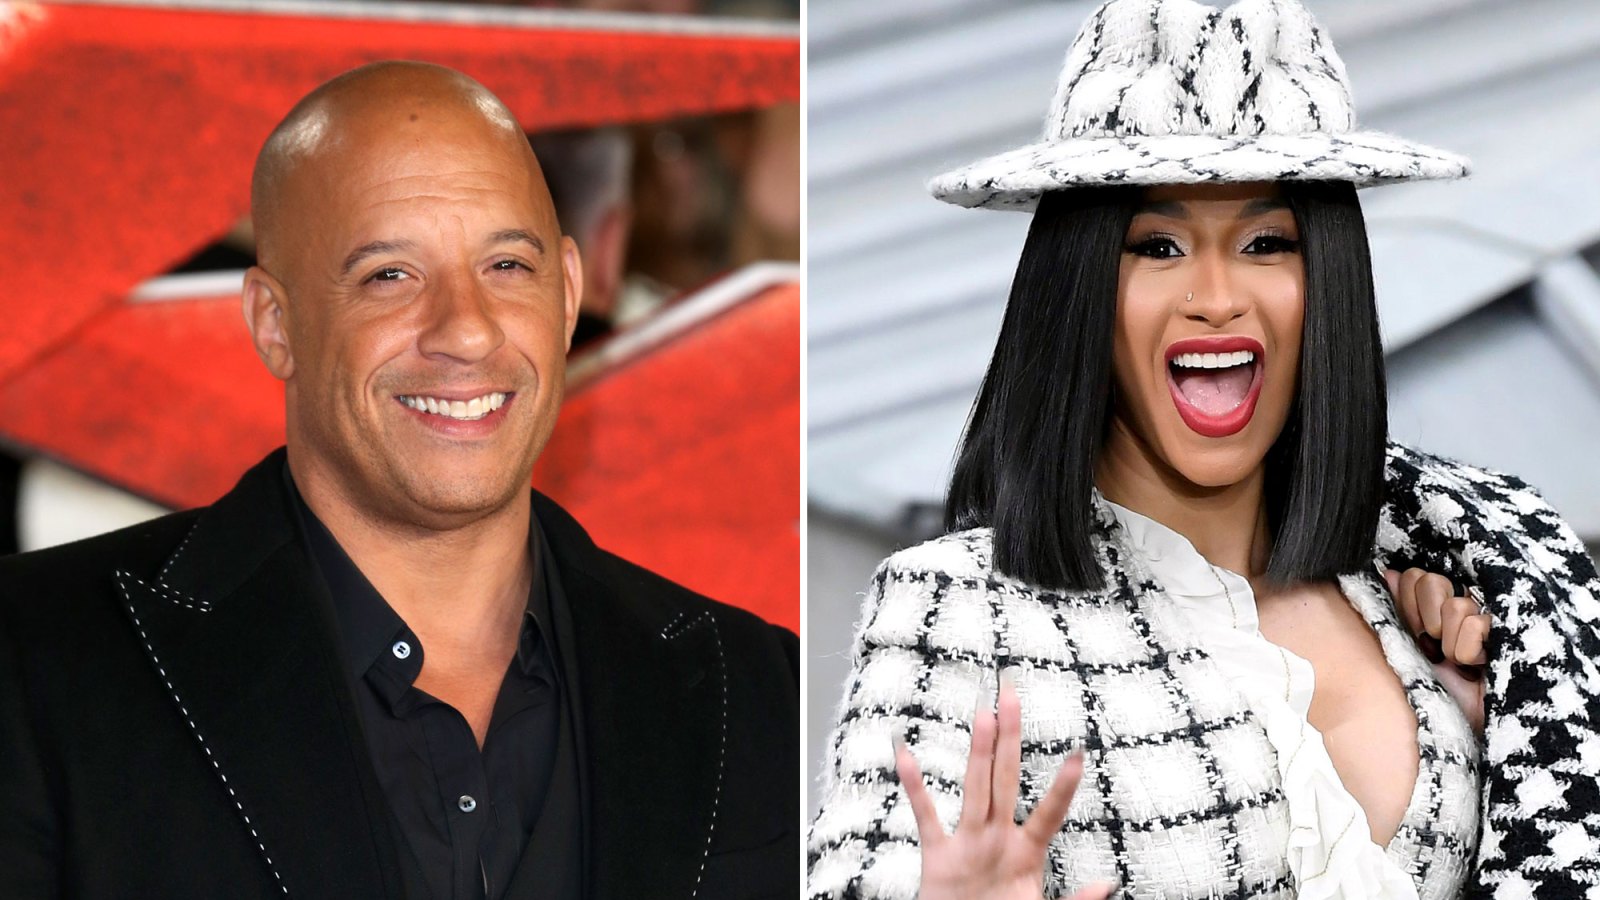 Vin Diesel Reveals Cardi B to Join ‘Fast & Furious’ Cast In New Post